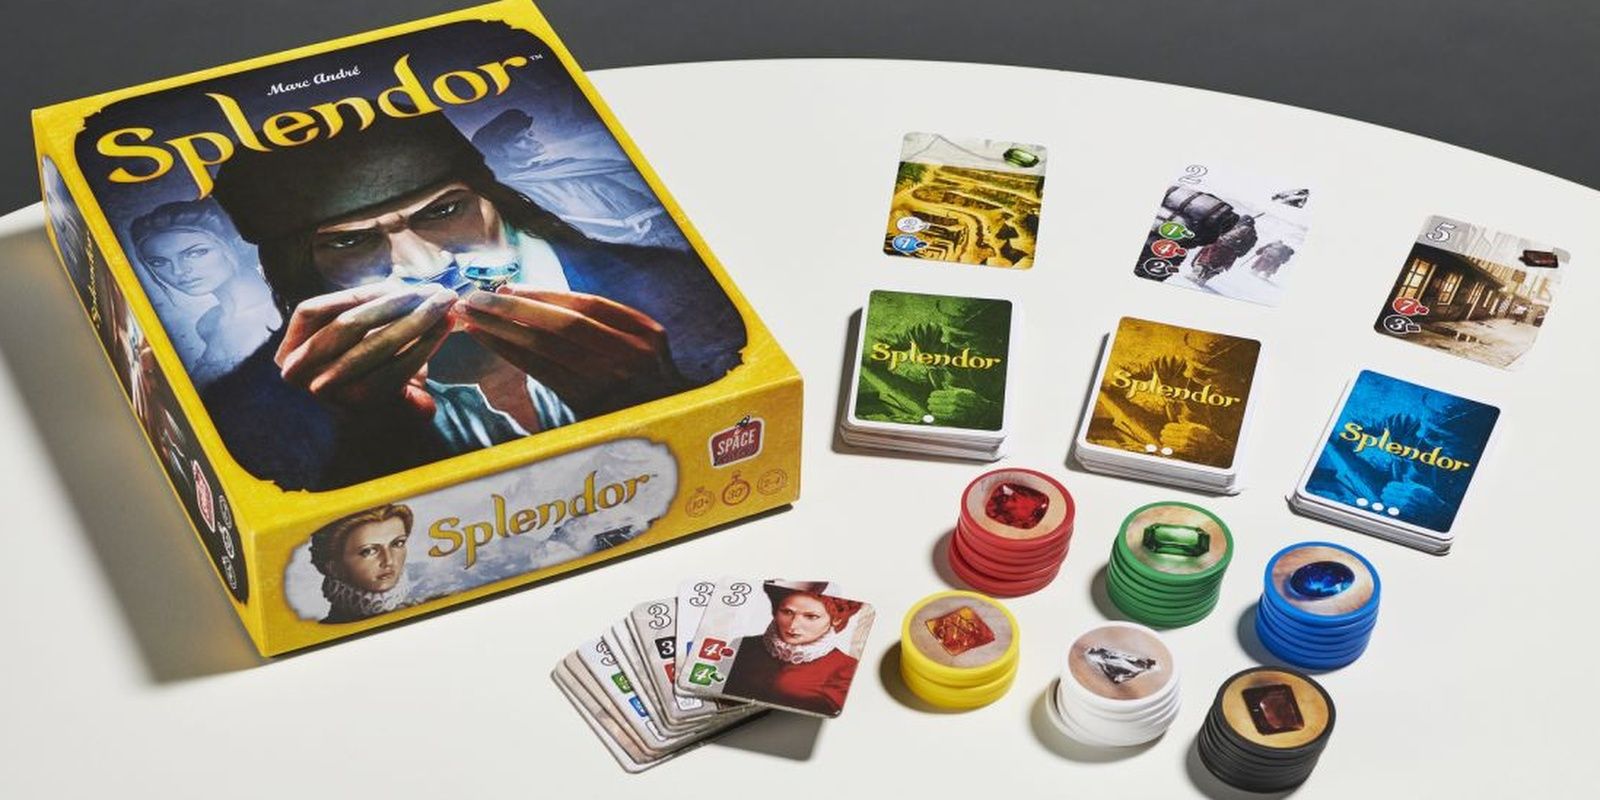 The box art and components of Splendor board game.